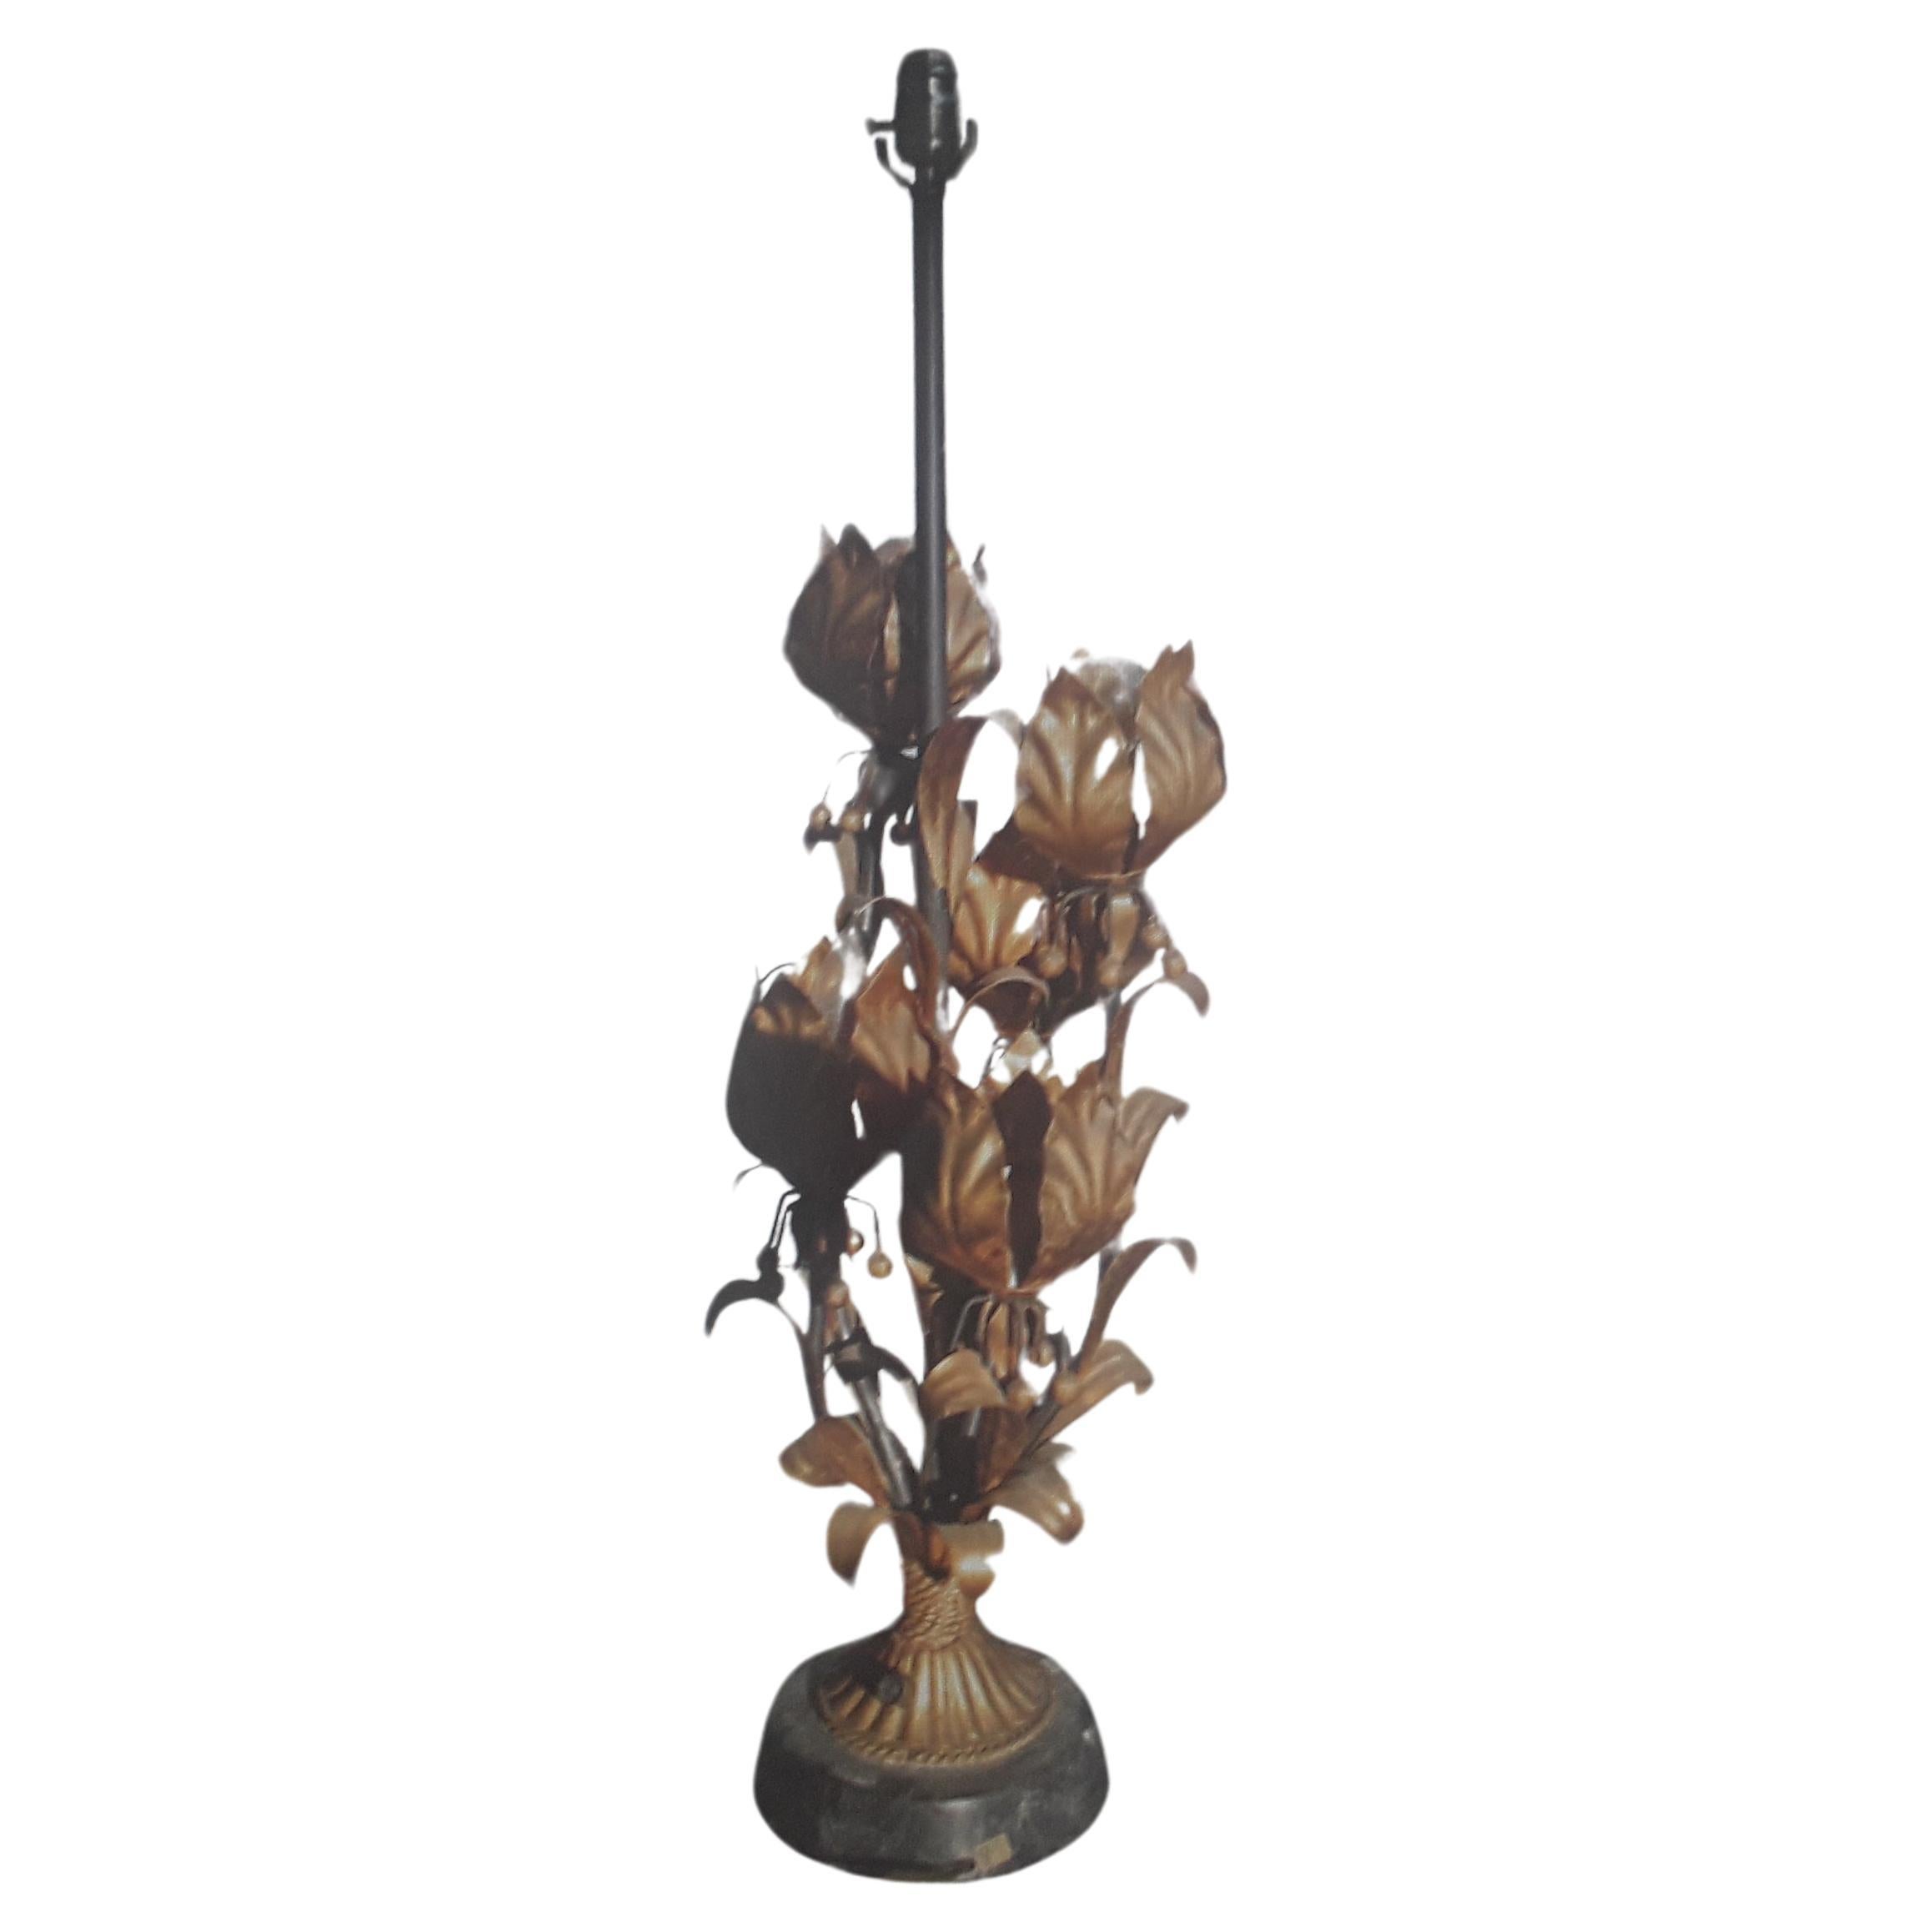 c1950's French Mid Century Modern Tall Gilt Tole Open Bud Lotus Table Lamp. This piece is in the style of Maison Charles France. 